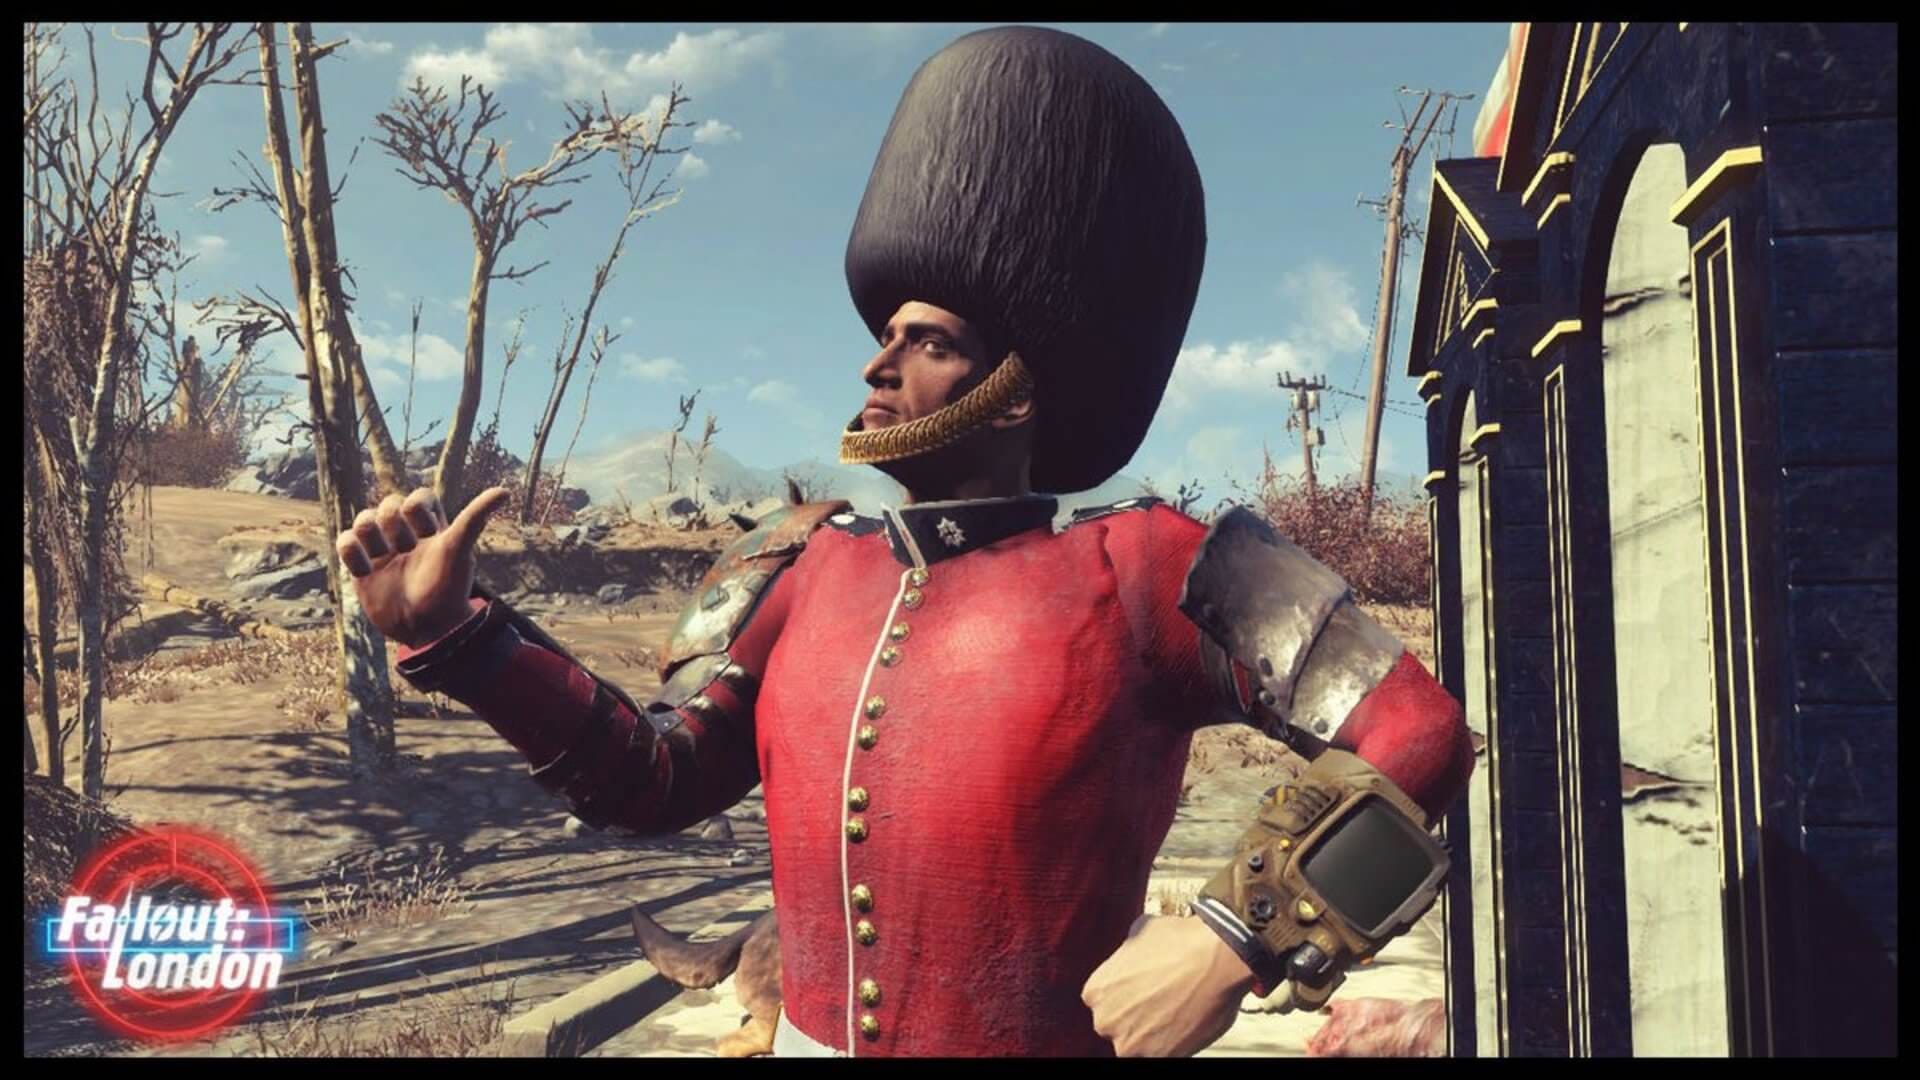 The protagonist of Fallout: London dressed as a royal guard.